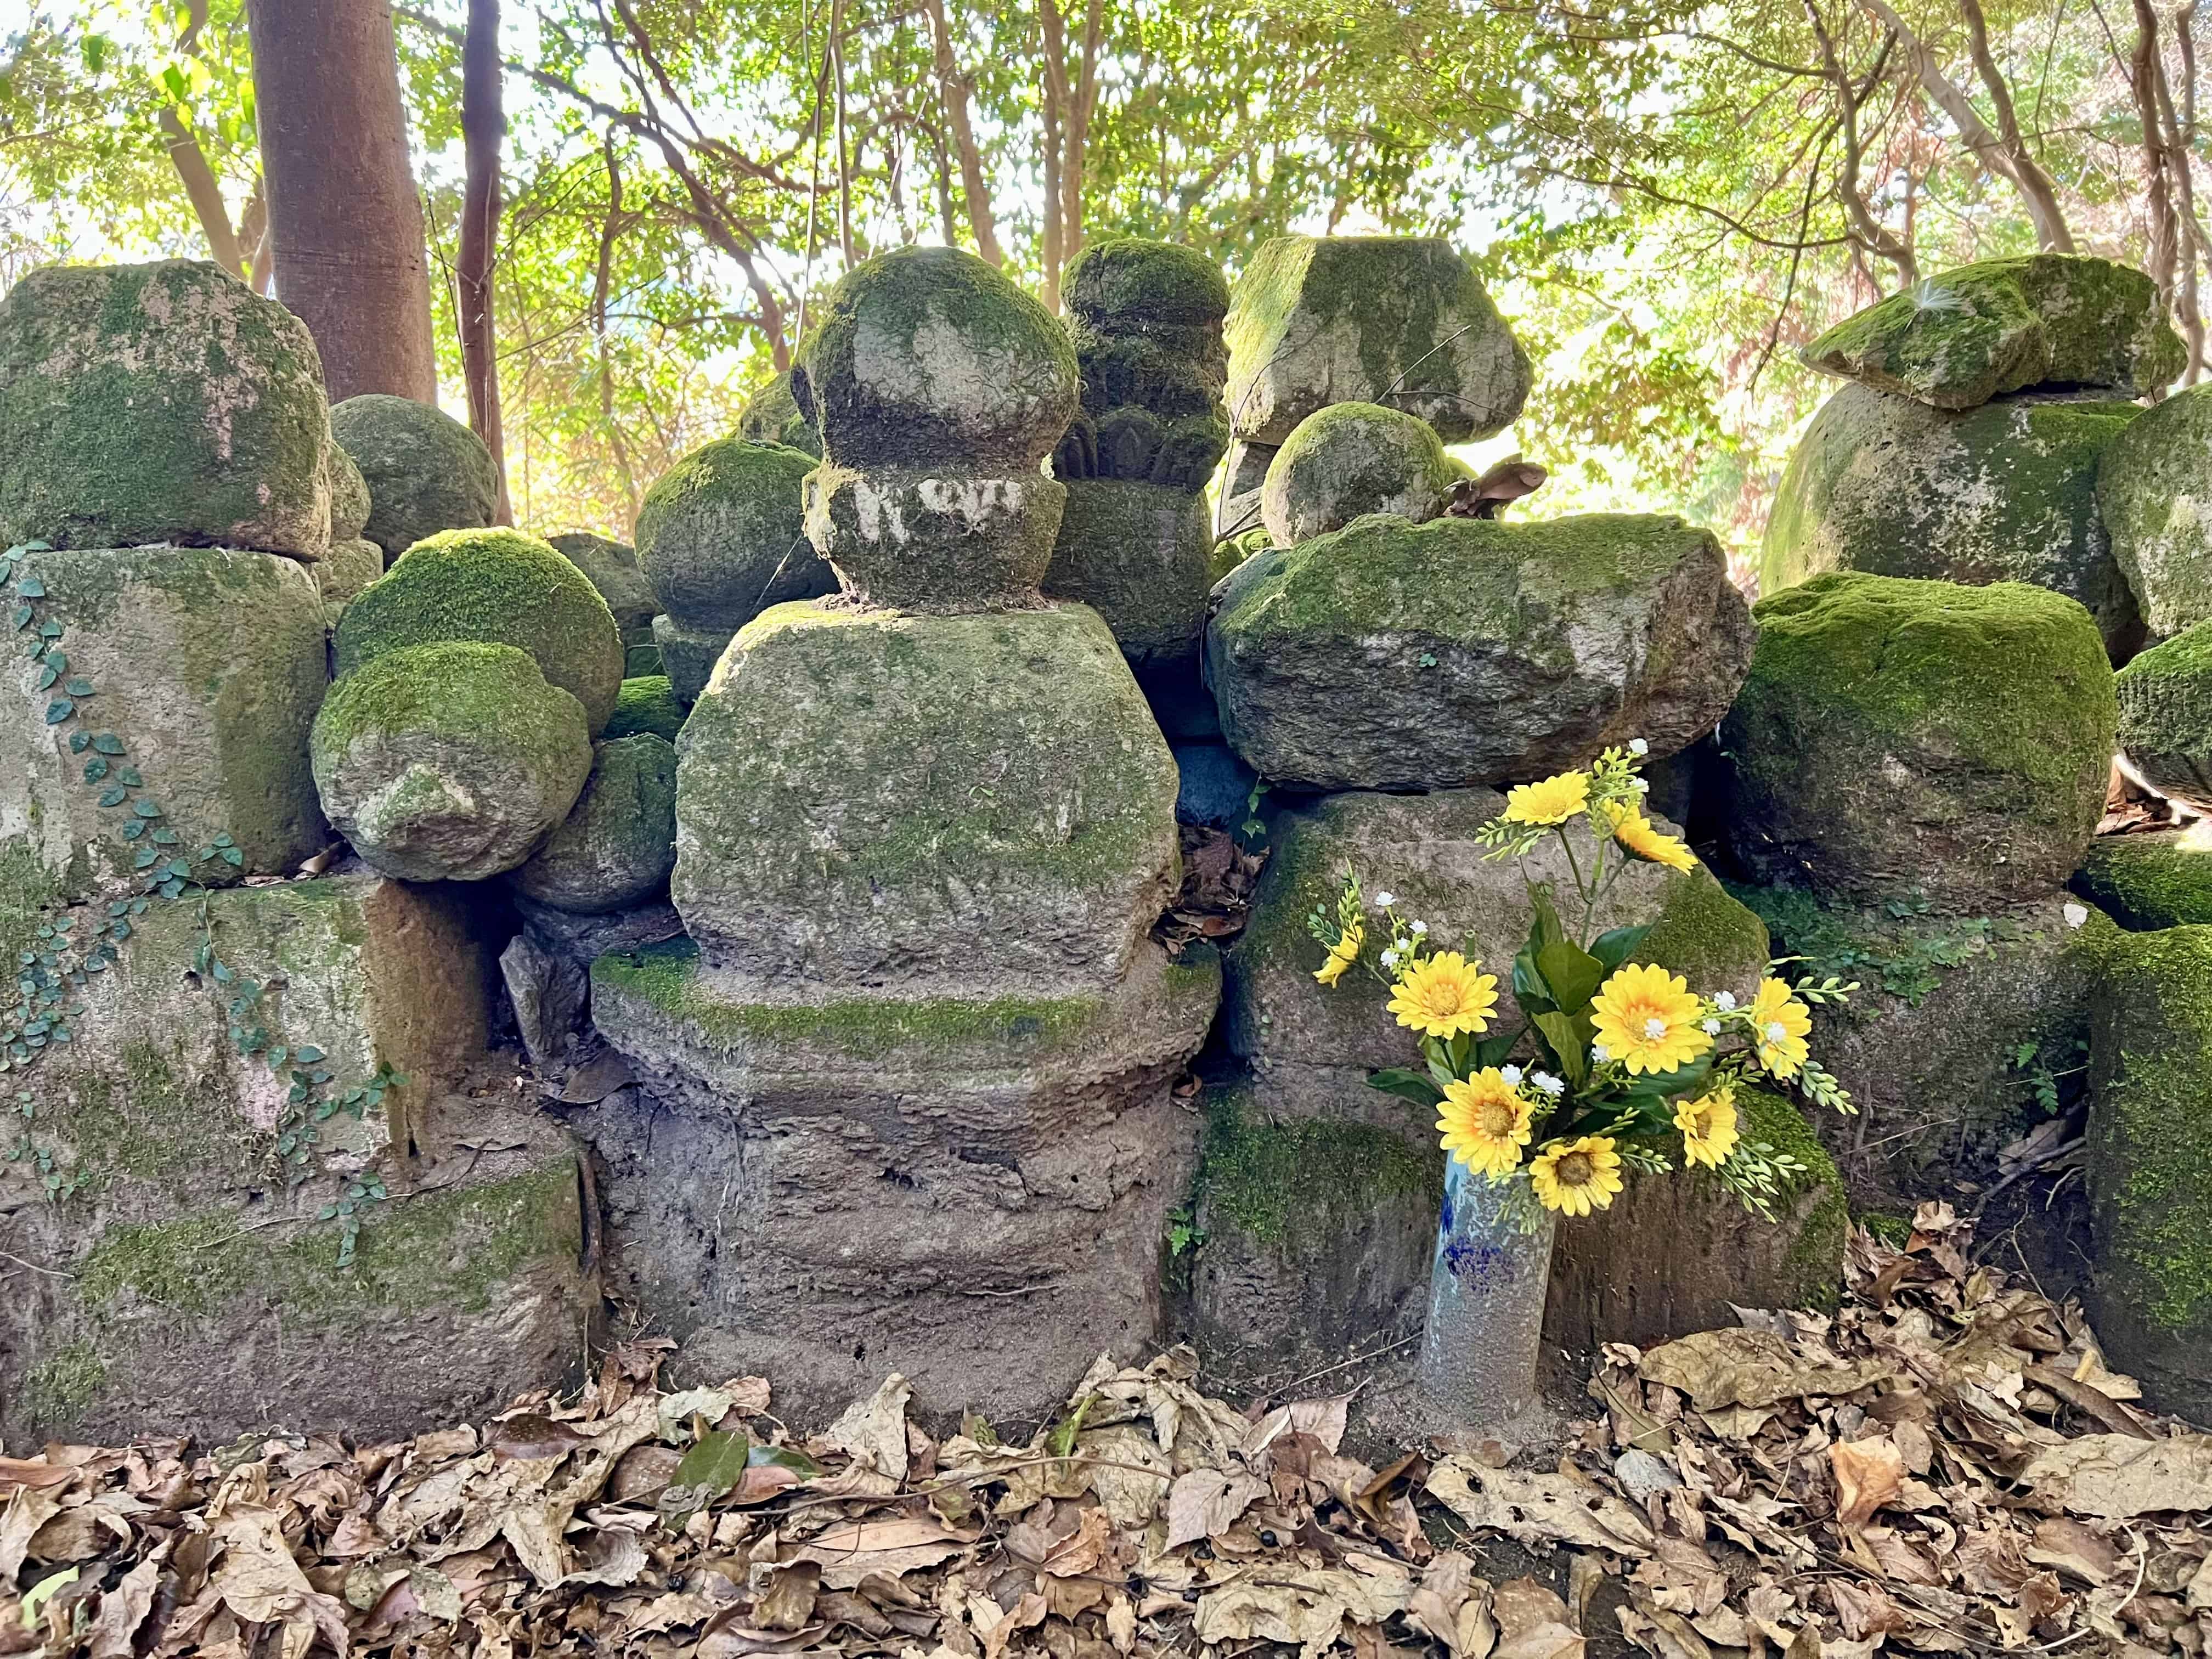 Mossy Buddhist grave memorials gathered amid fallen leaves.